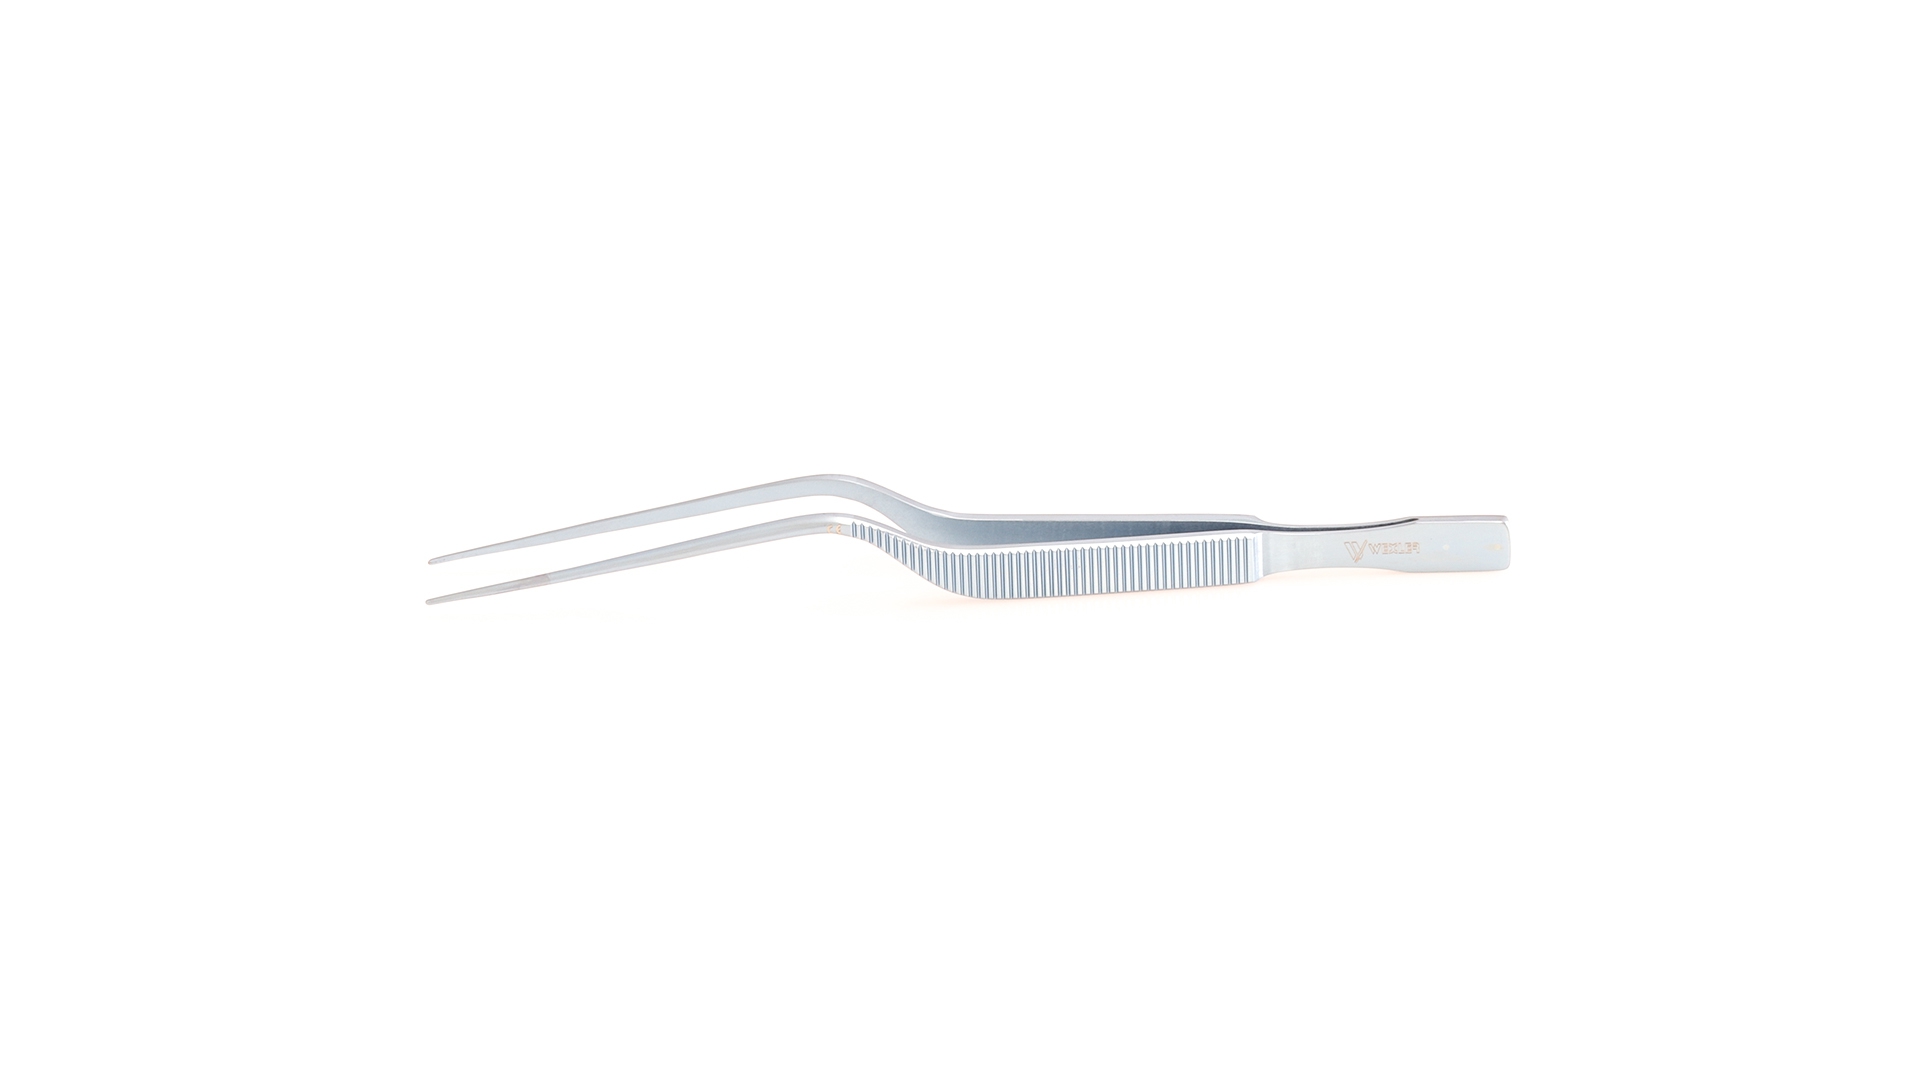 Micro Forceps - Straight 1.5mm tips